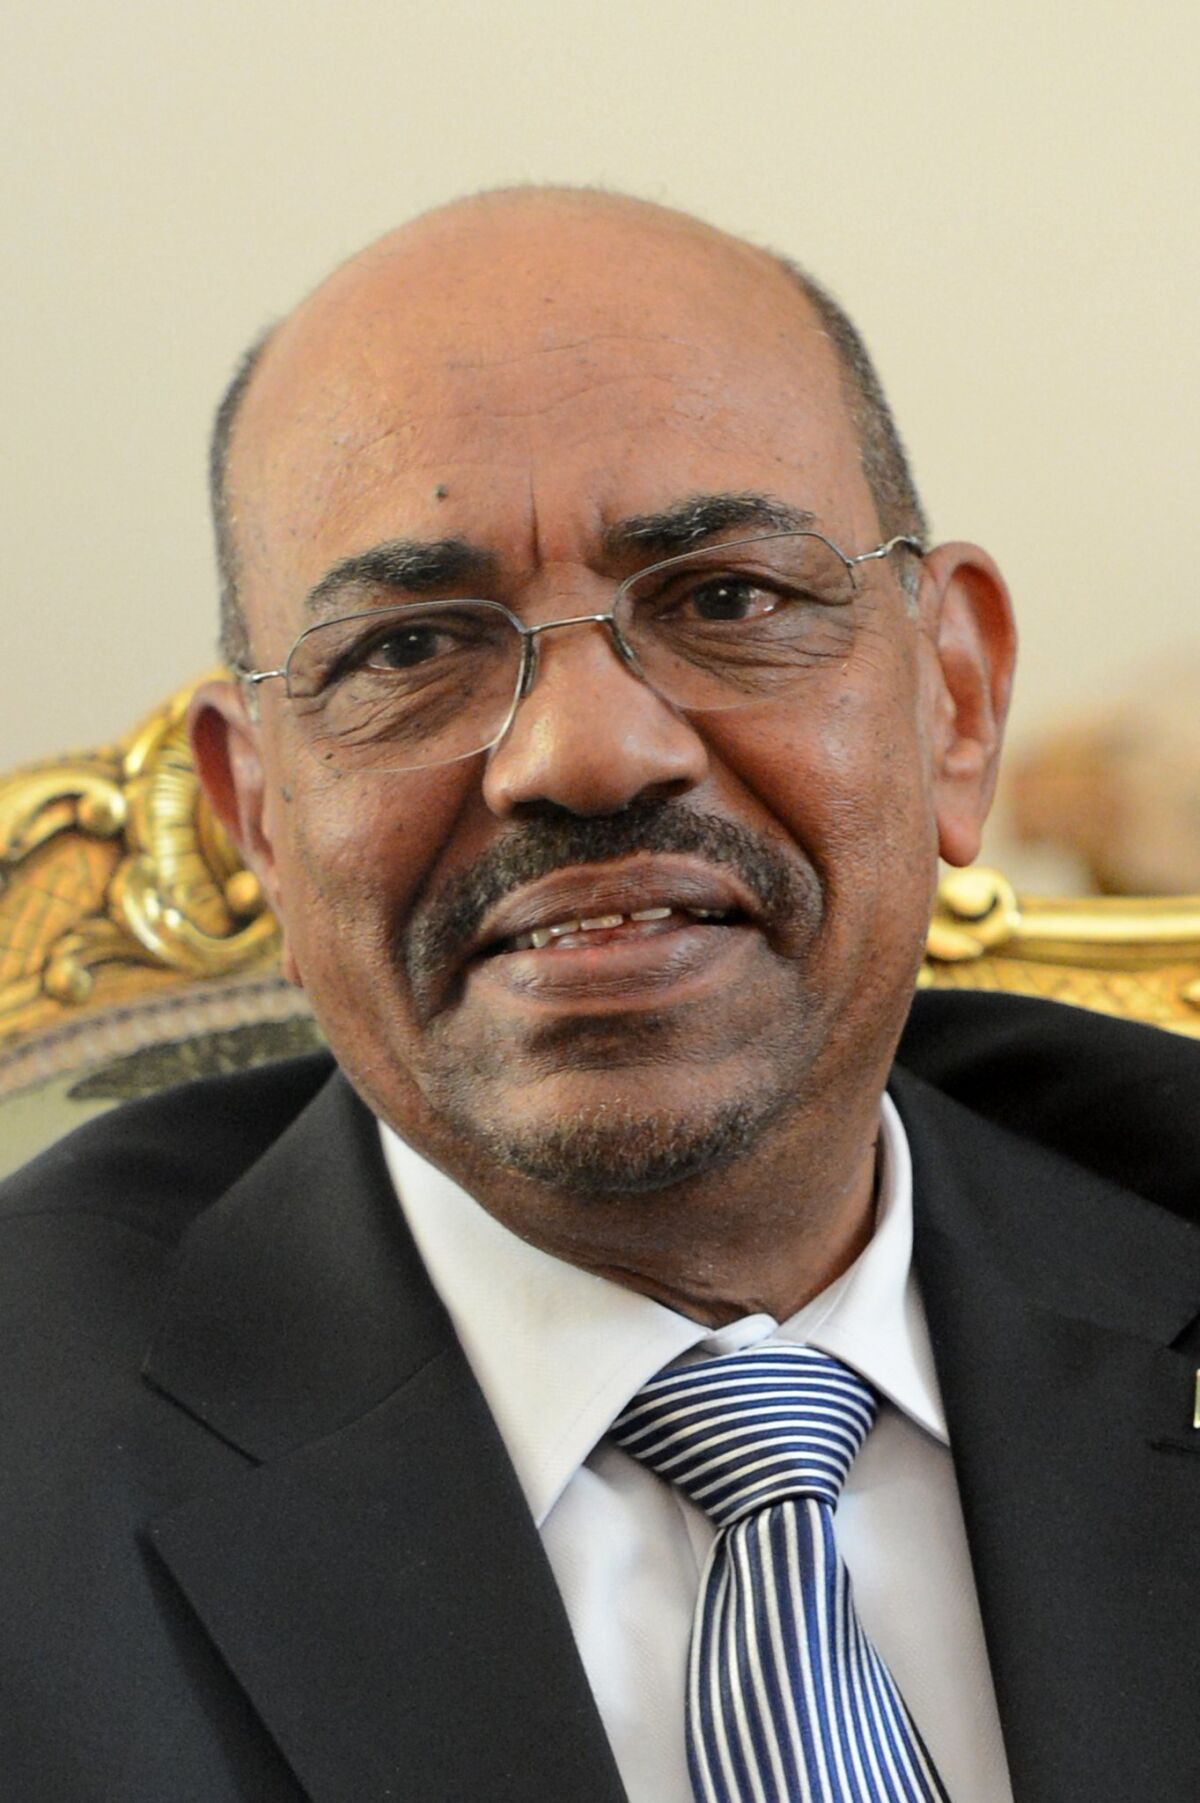 Sudanese President Omar Hassan Ahmed Bashir, shown in 2012, took power in a coup, and nearly 30 years later, lost it in much the same way.